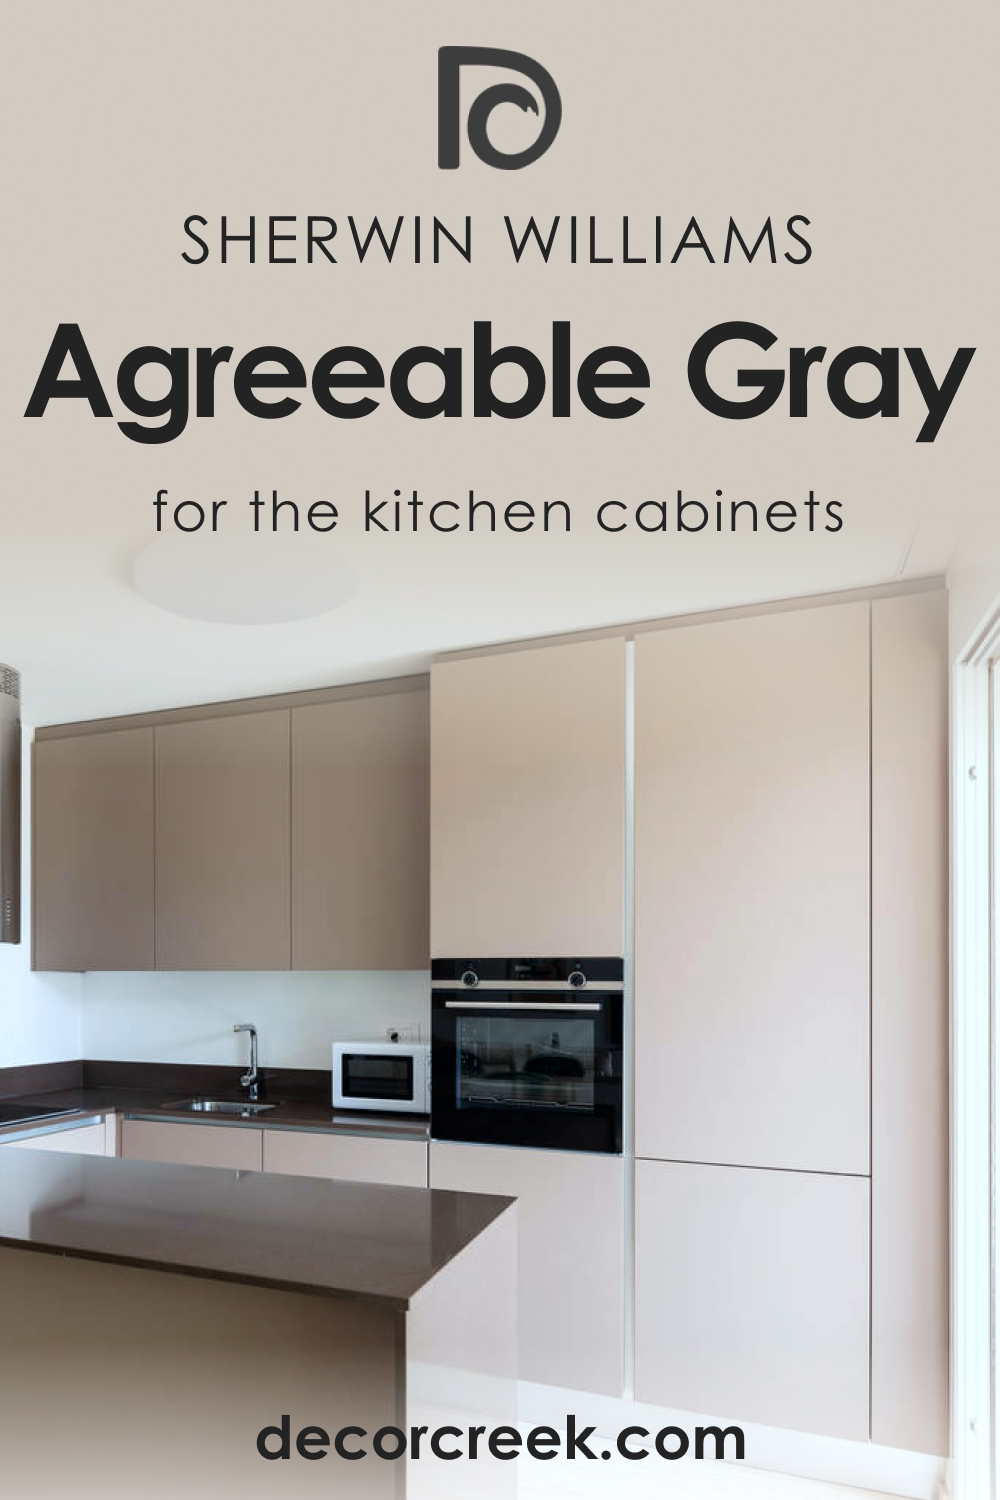 How to Use SW 7029 Agreeable Gray for the Kitchen Cabinets